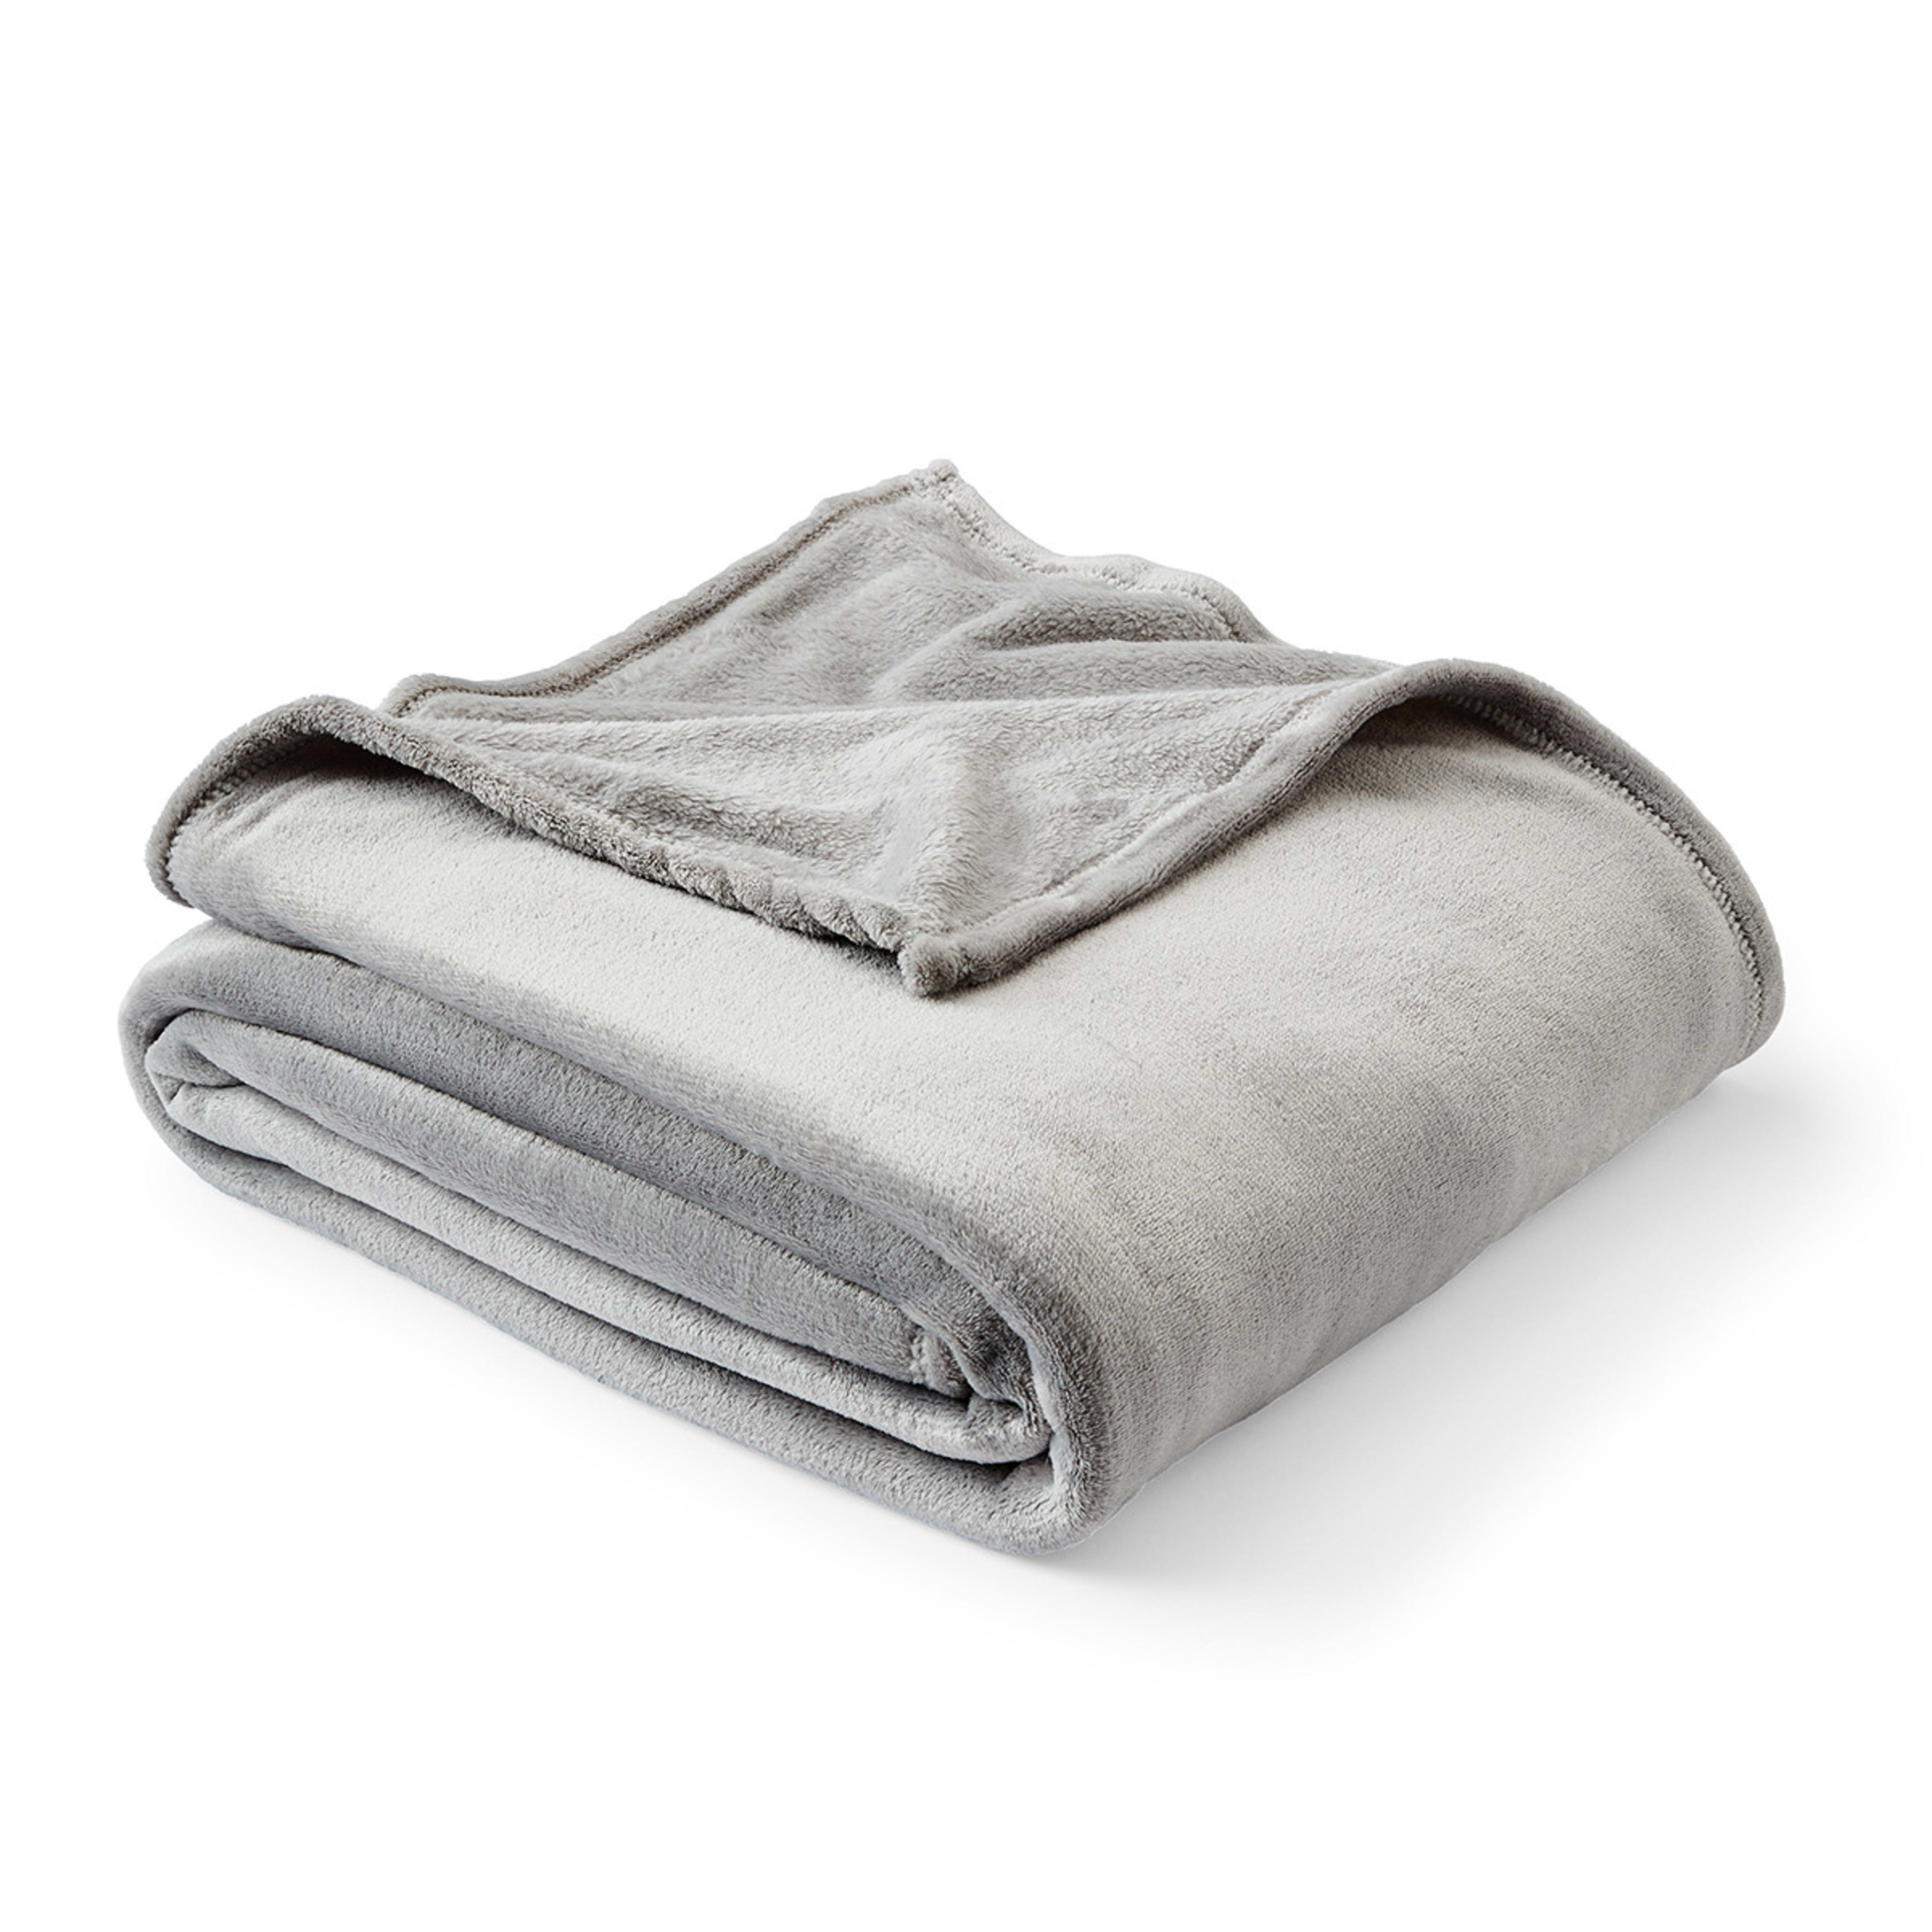 Soft Touch Blanket - Double/Queen Bed, Grey